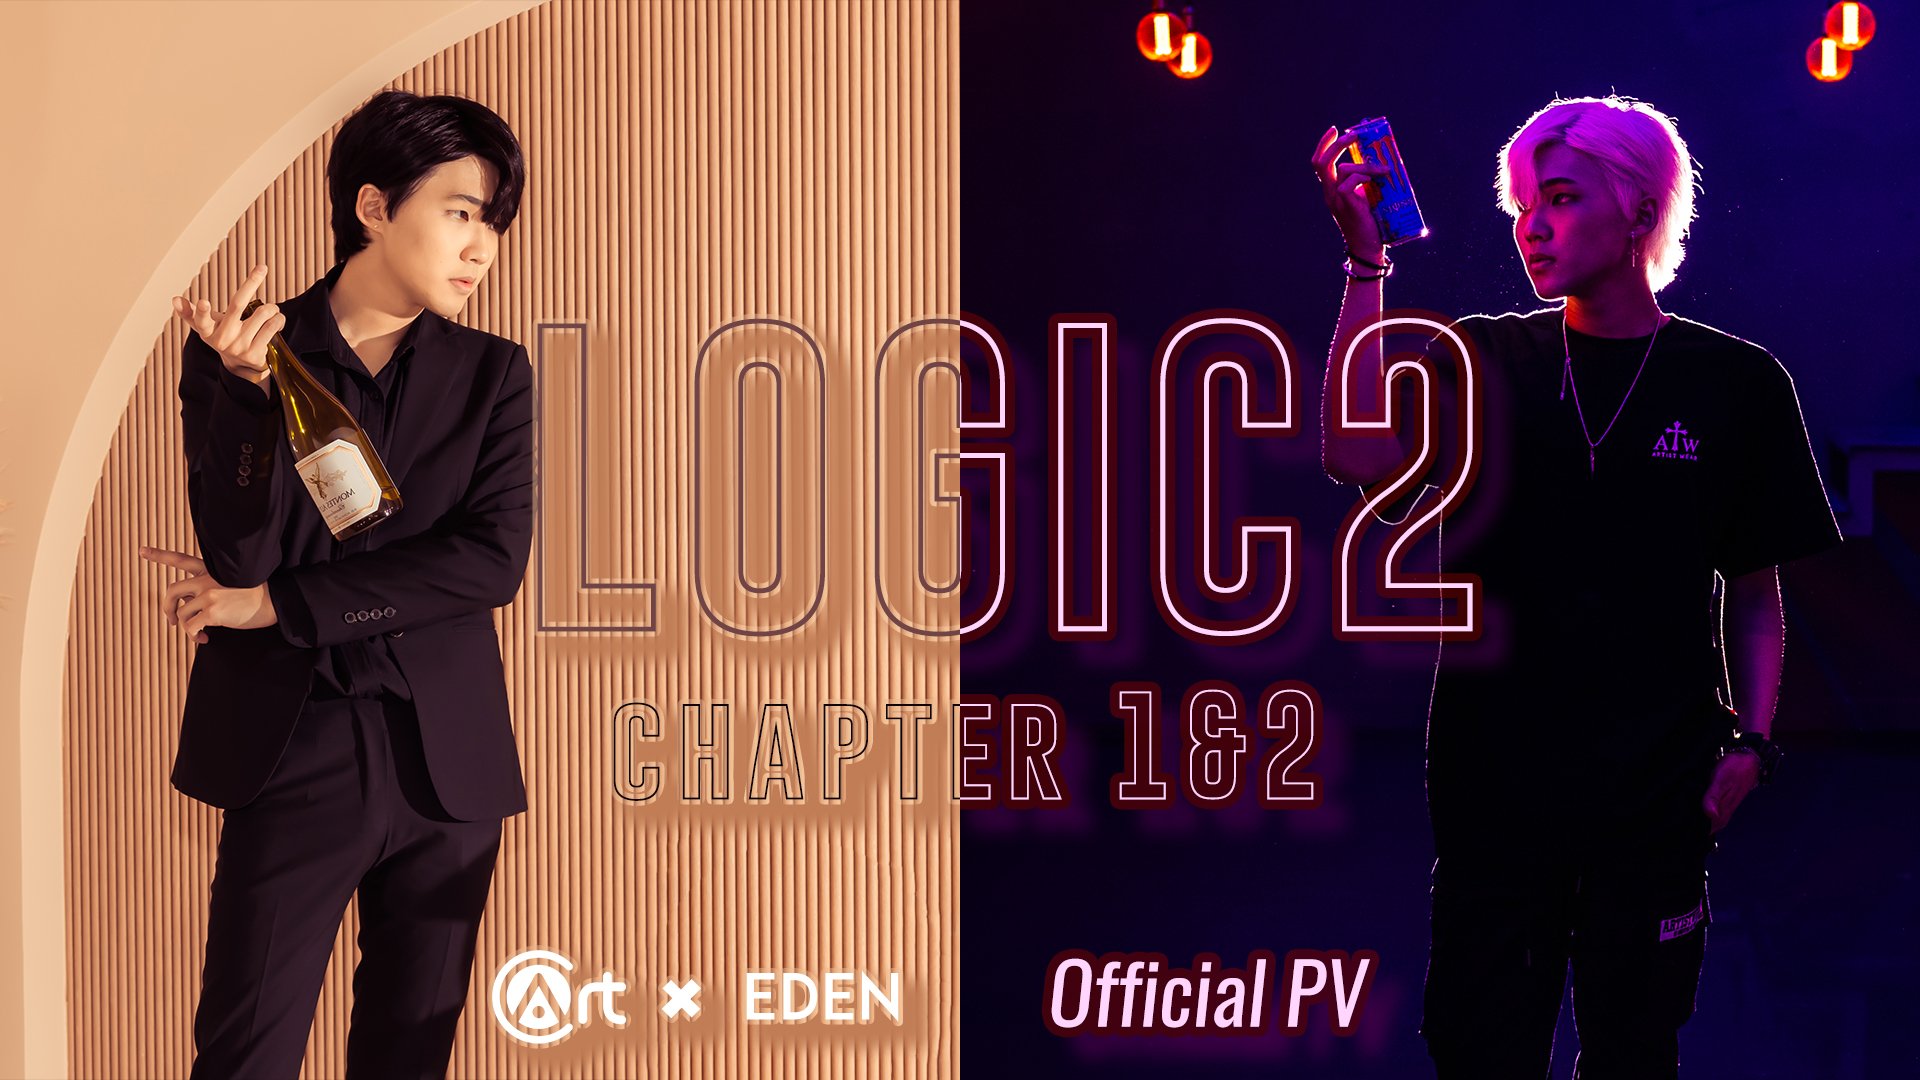 Logic 2 by Eden (Chapter 1 and 2) (Two MP4 Videos Download 1080p FullHD Quality)